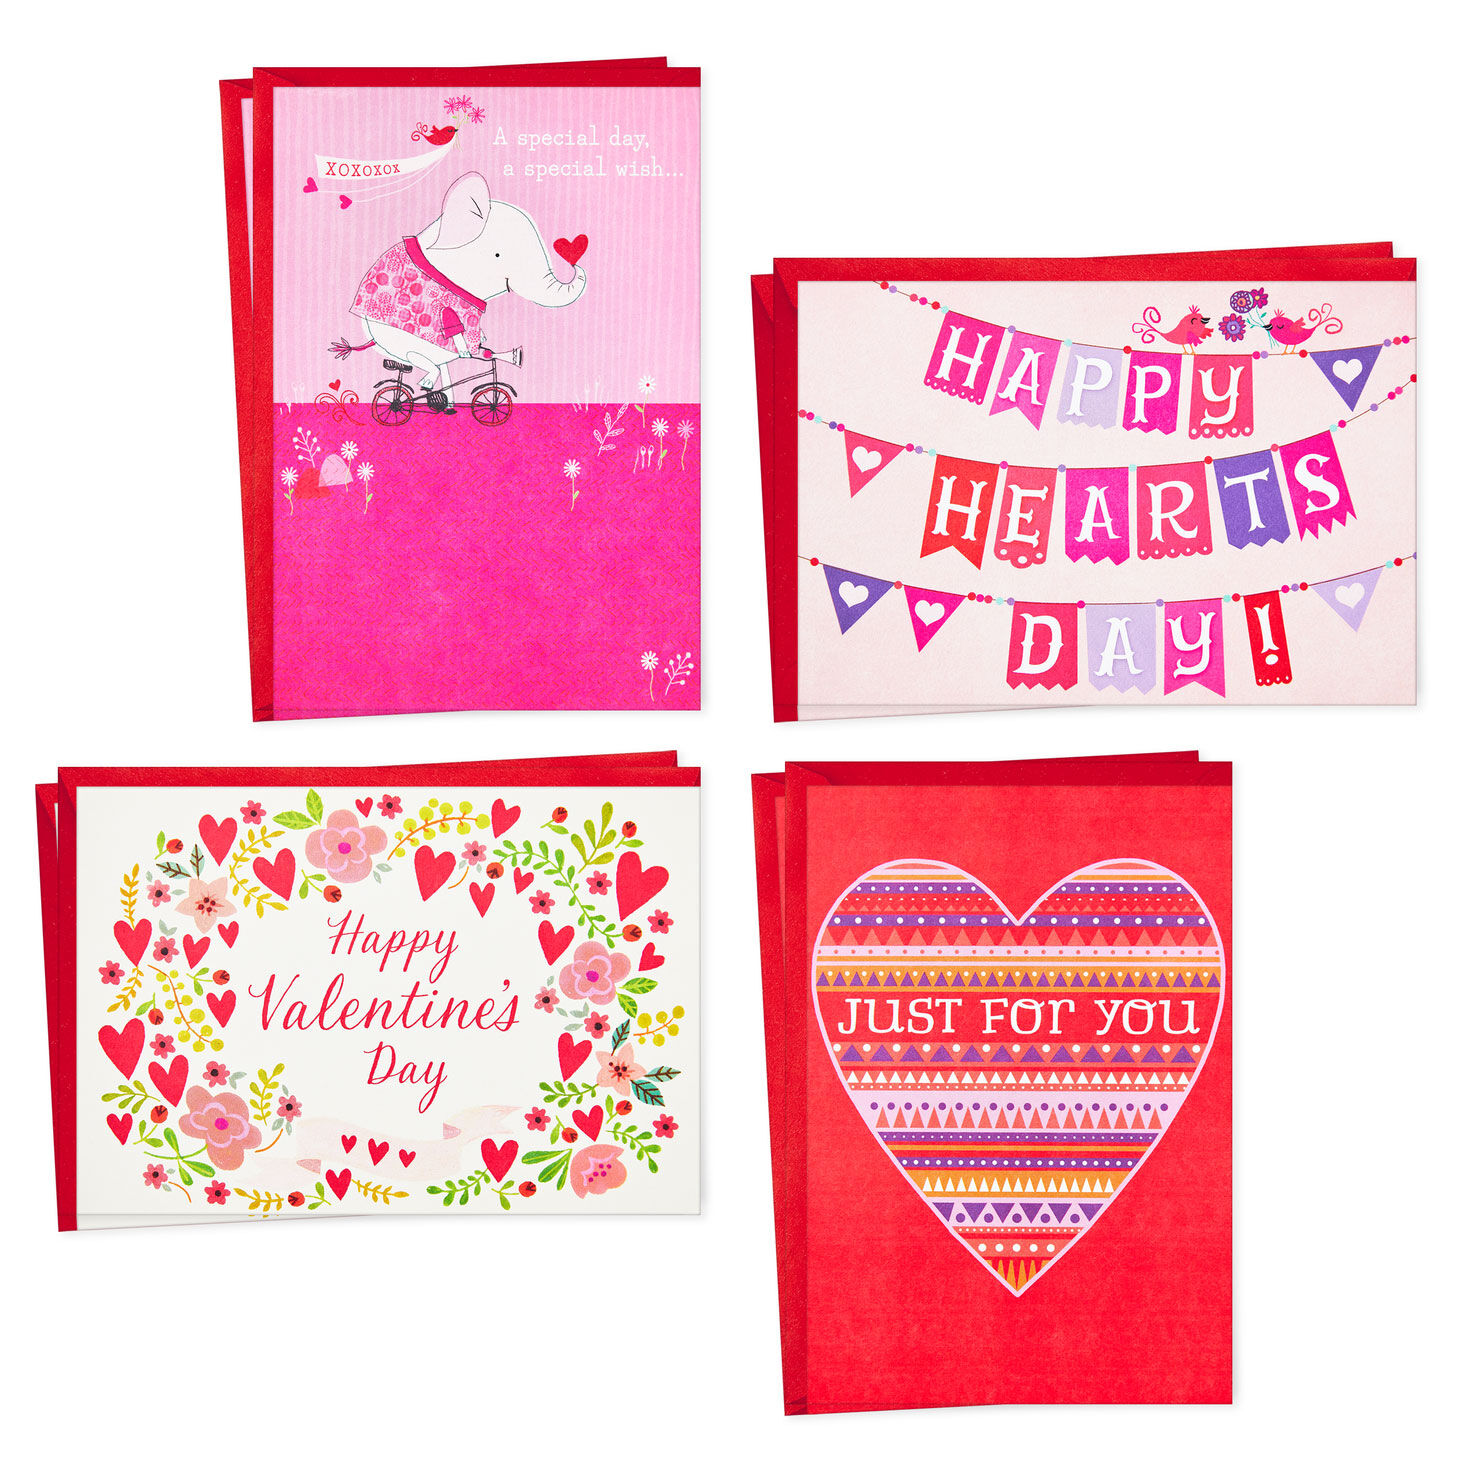 Hallmark Pack of Valentines Day Cards Hearts and Flowers 10 Cards with Envelopes 